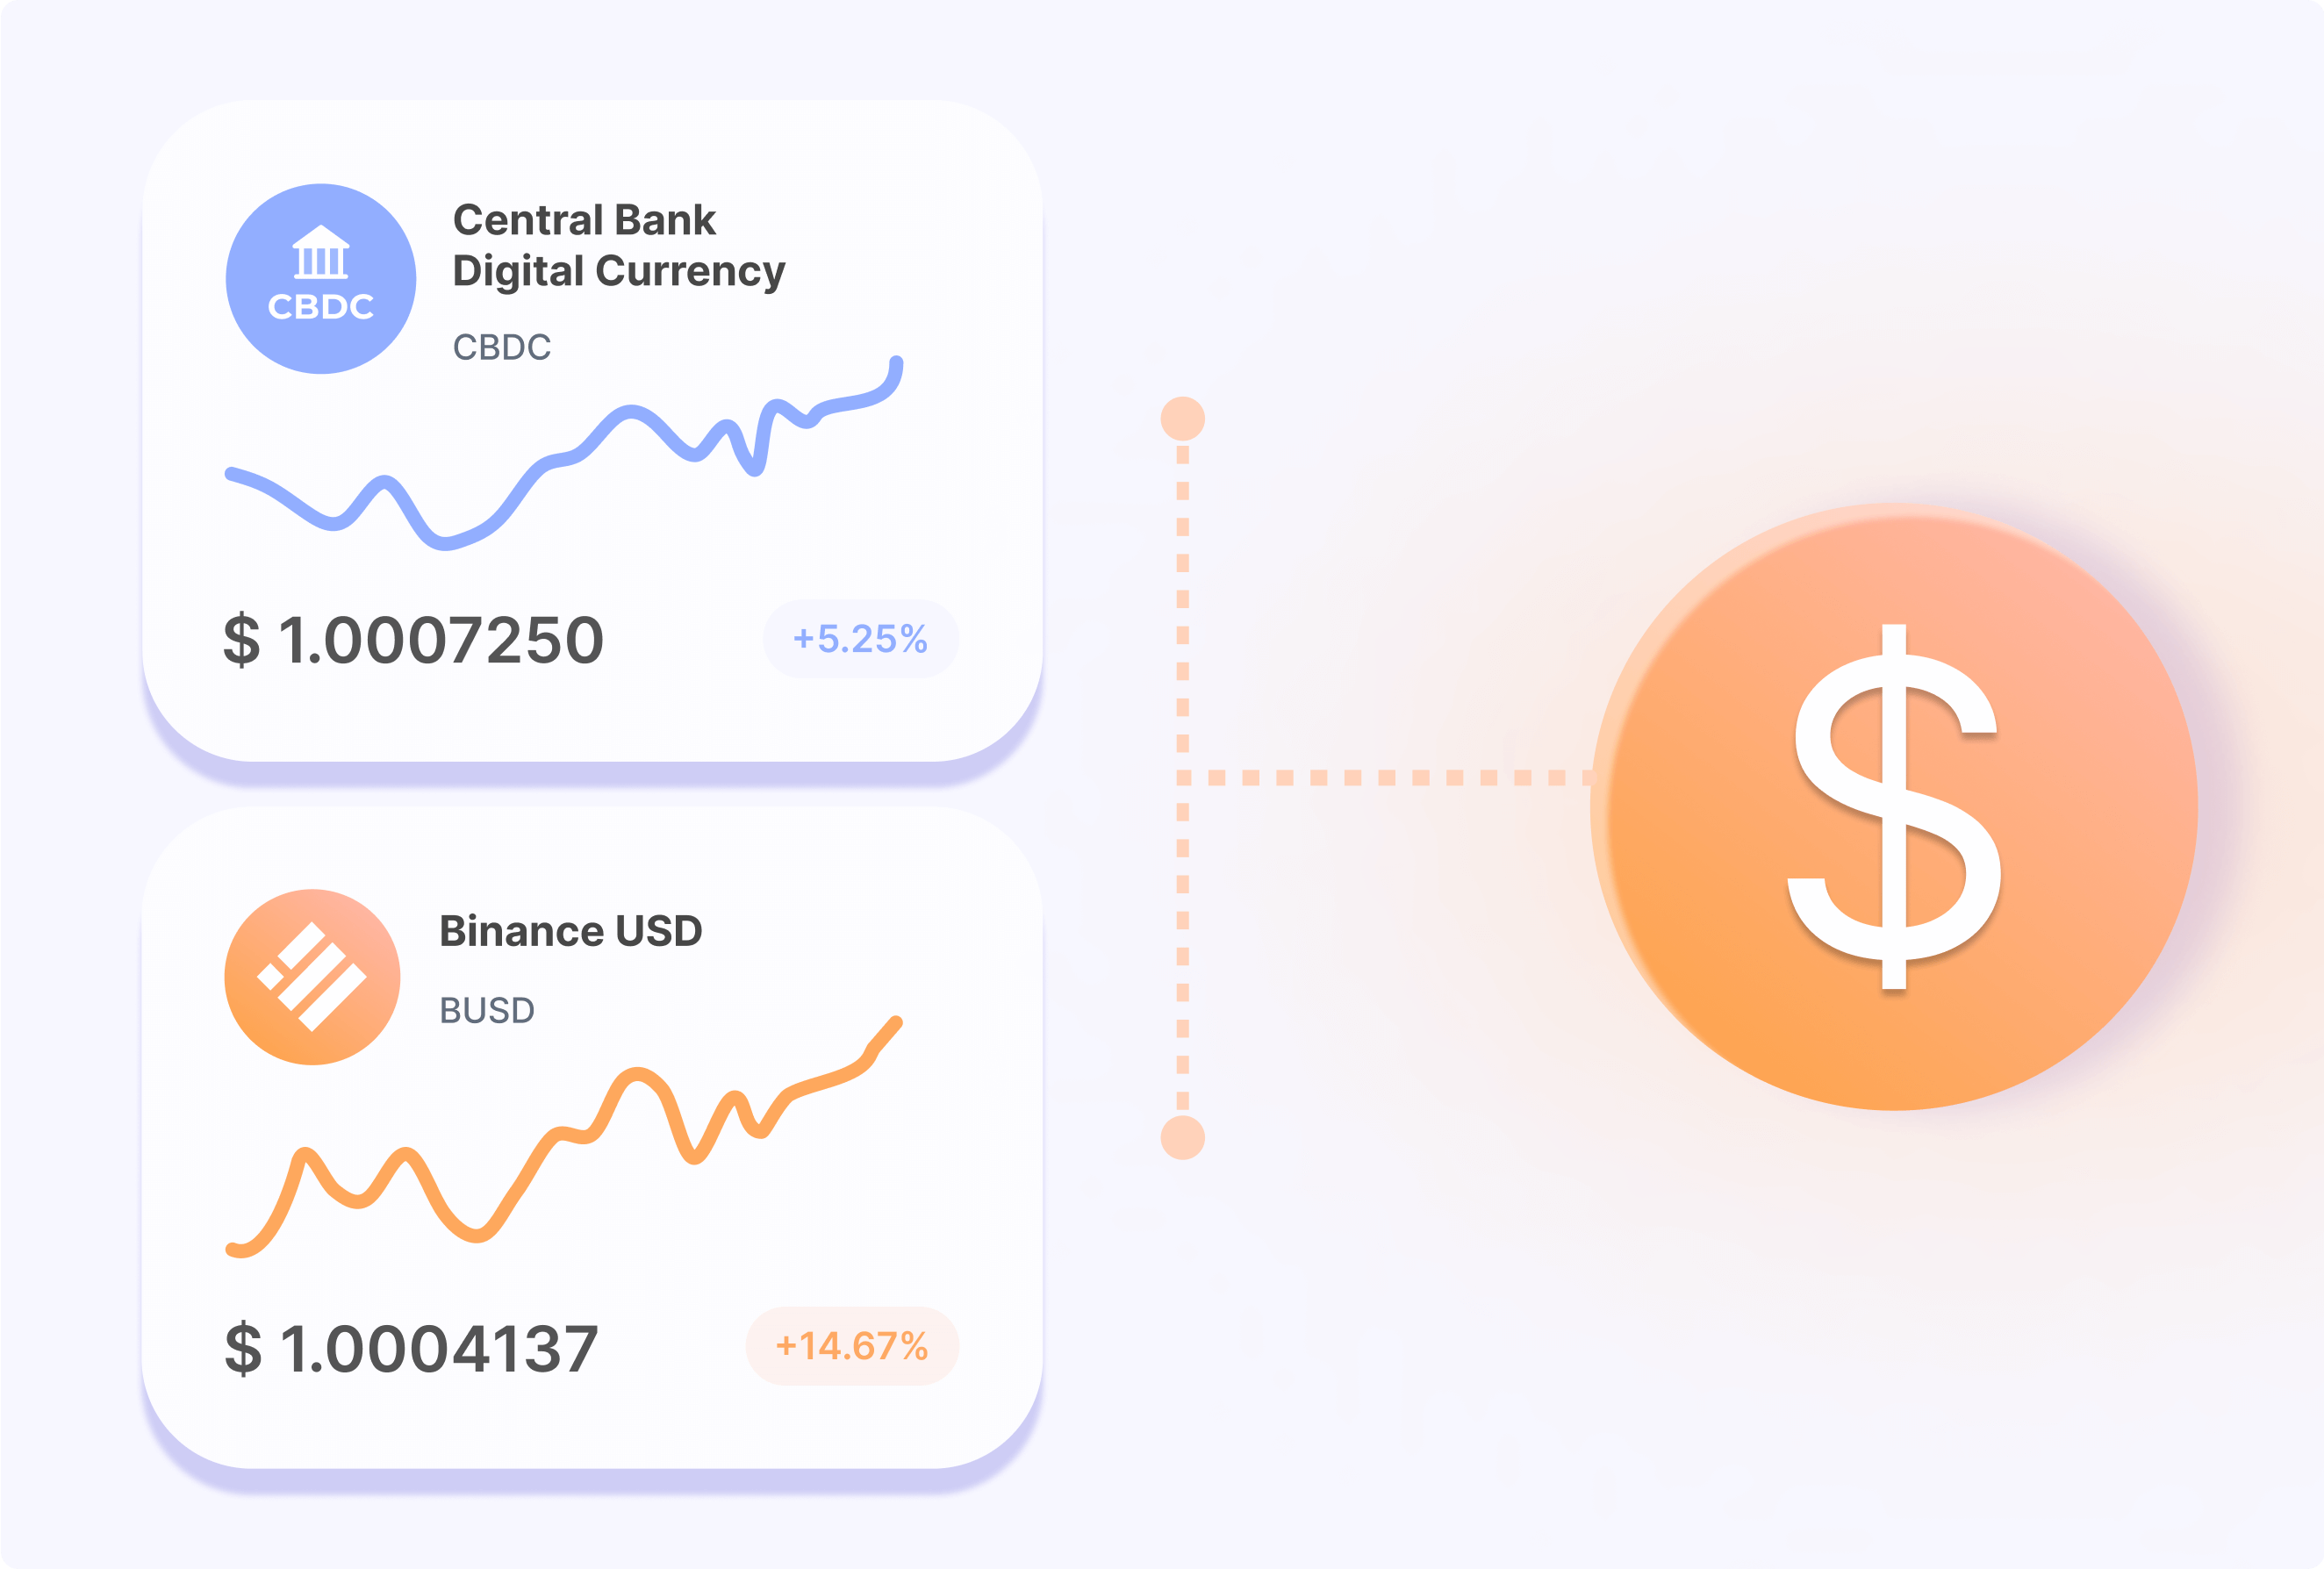 https://liquidity-provider.com/app/uploads/2022/11/stablecoins-and-central-bank-digital-currencies-today.png